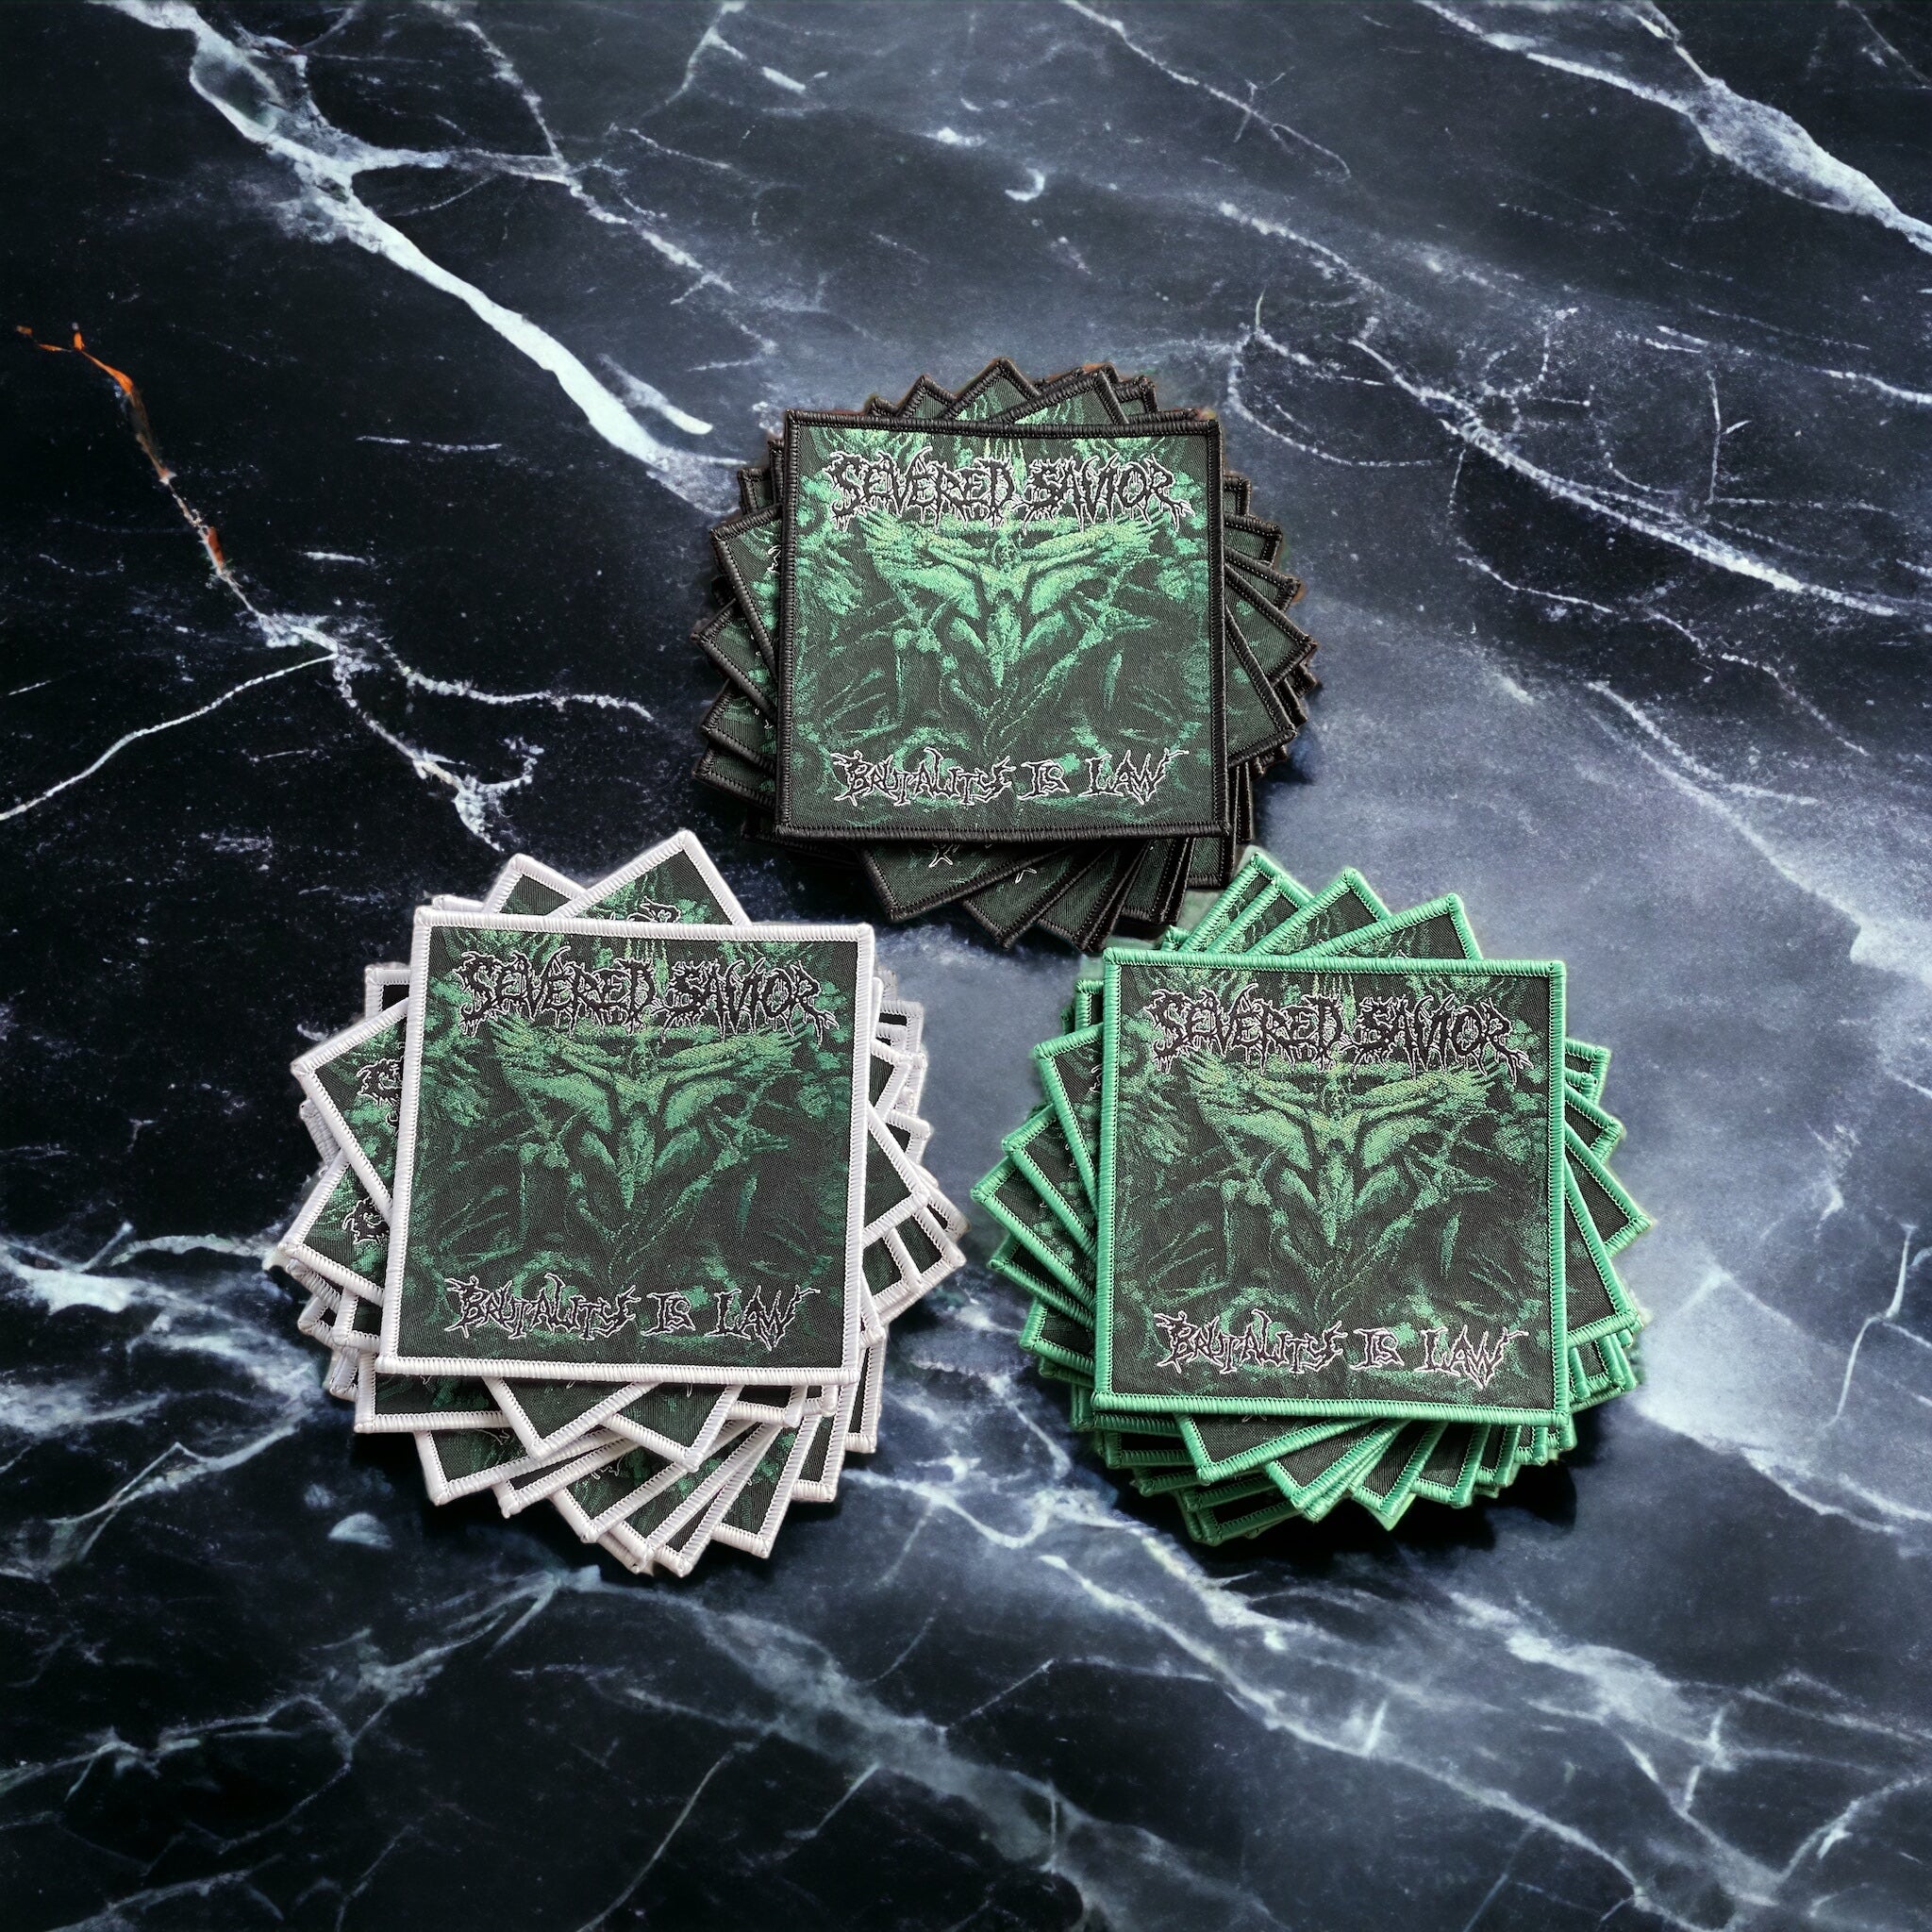 Severed Savior - Square Brutality is Law Patch - Green Border